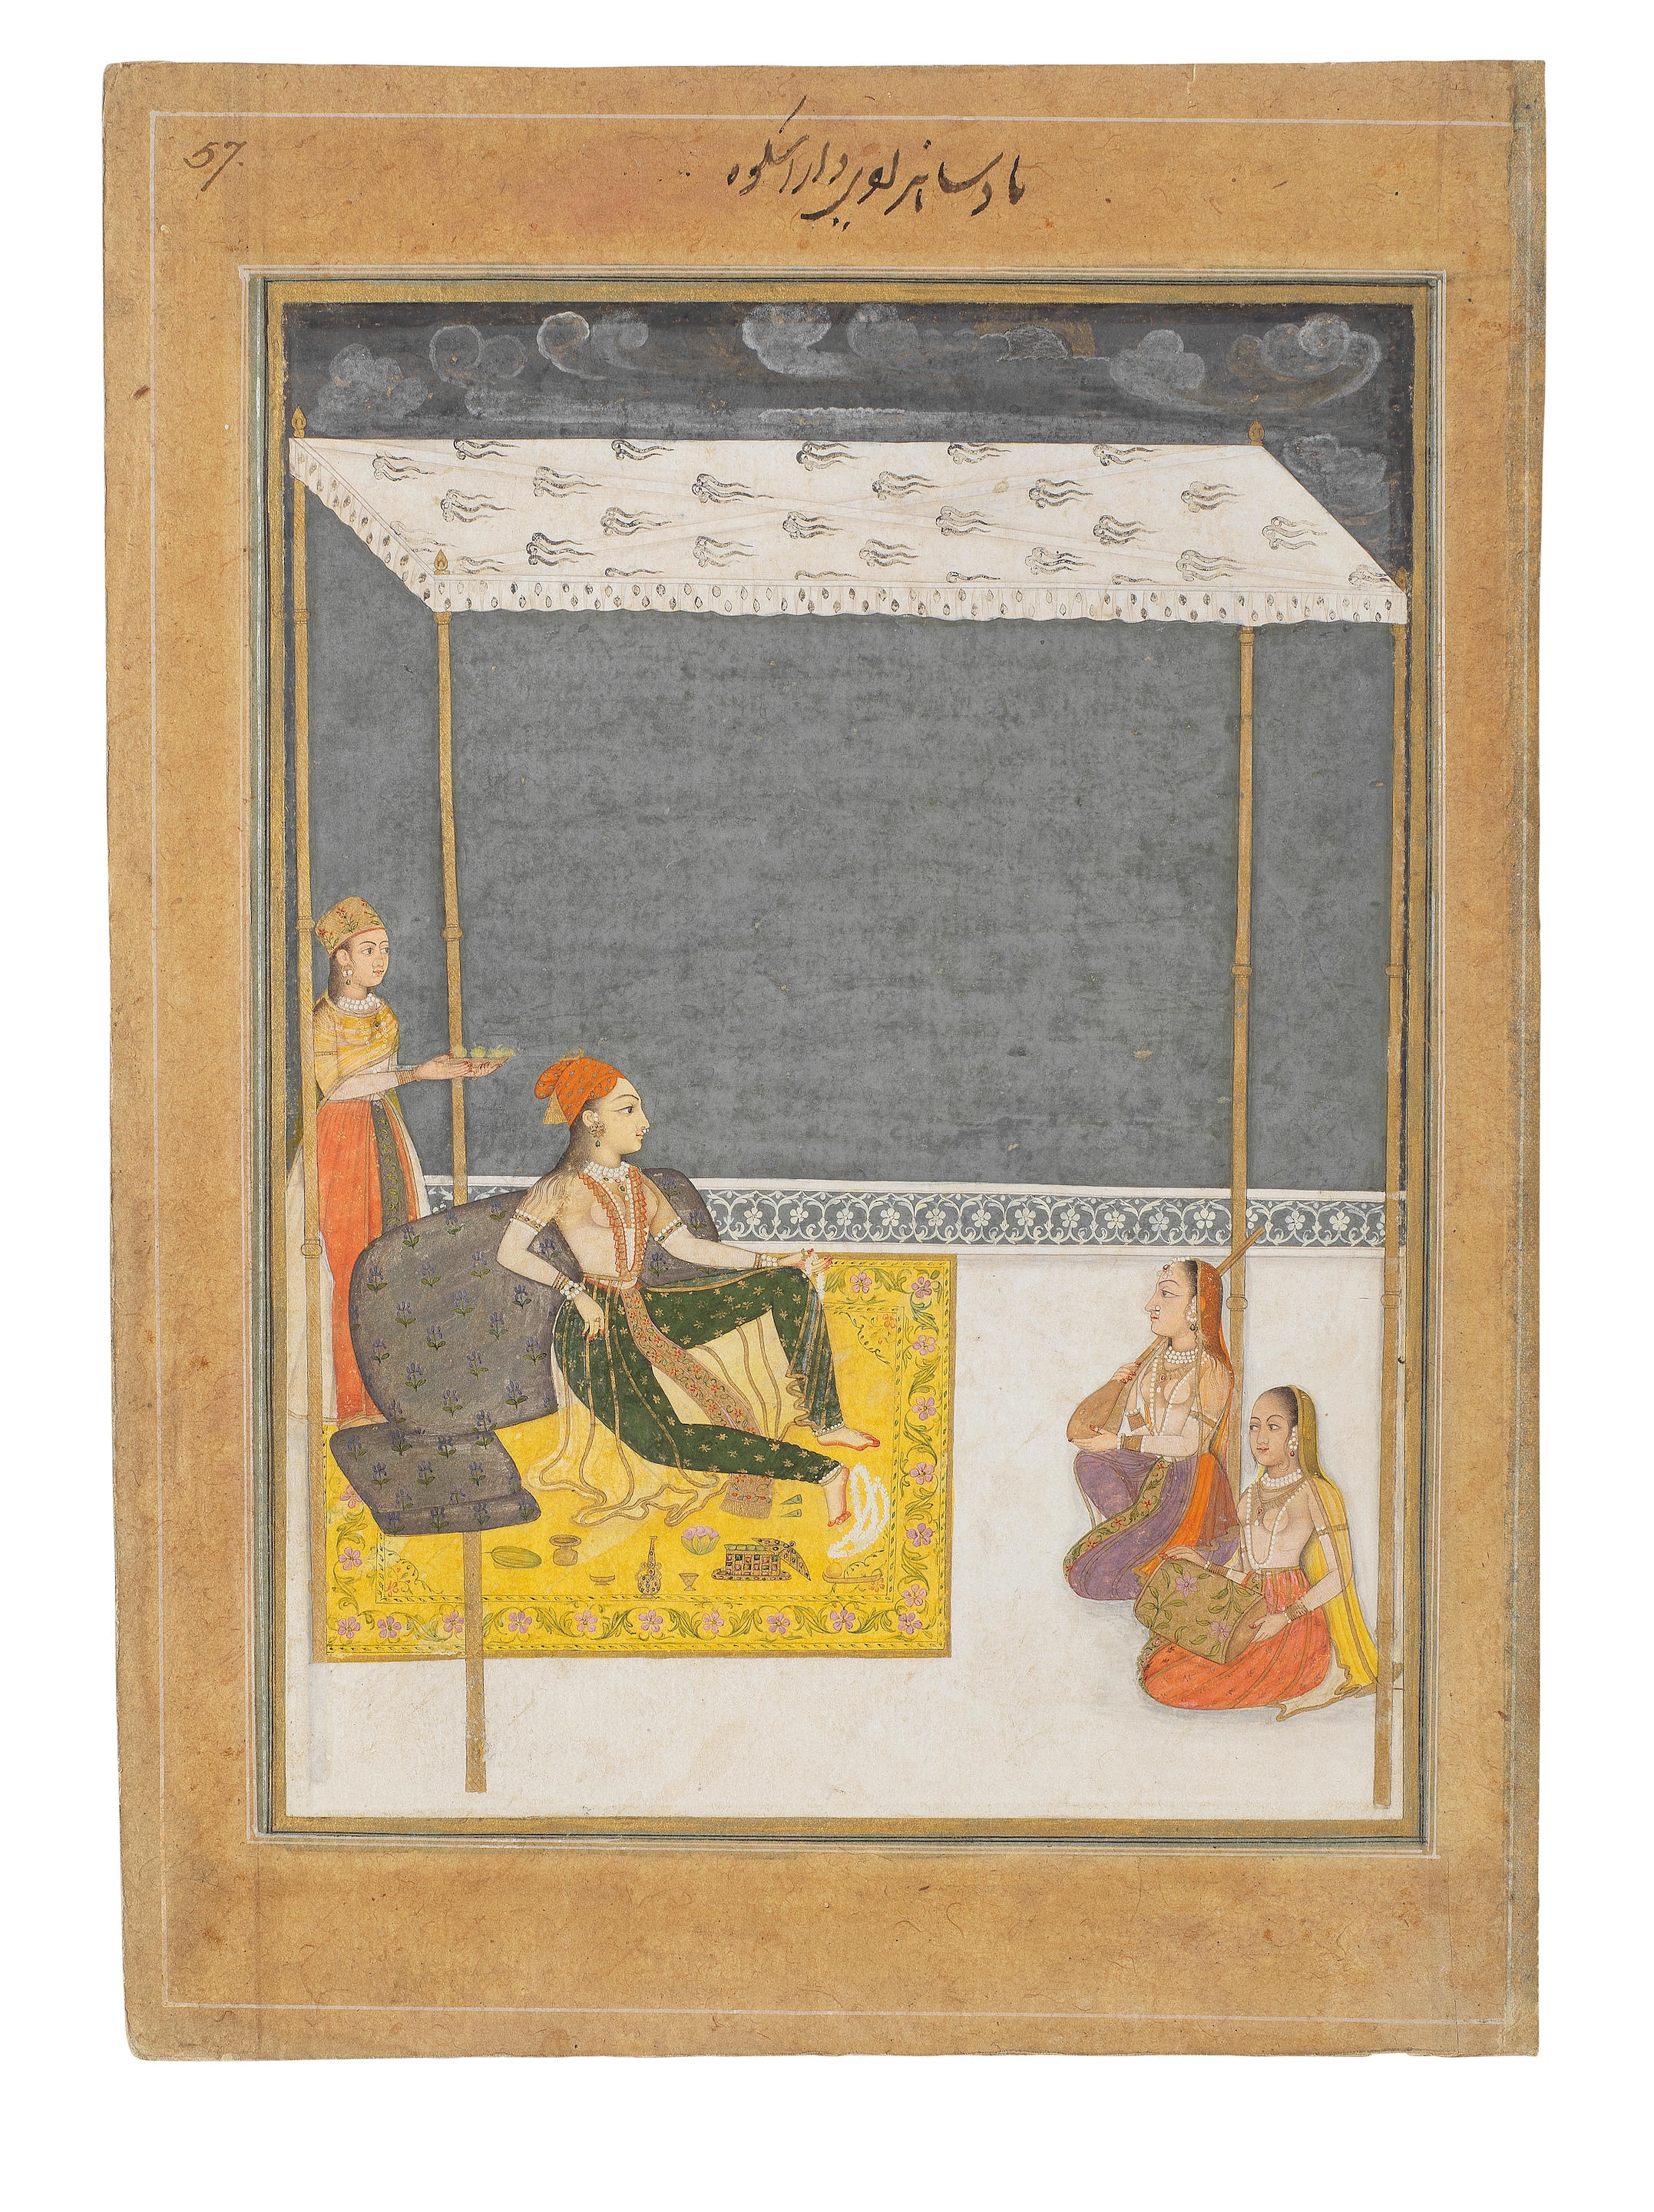 A noblewoman seated on a terrace listening to music - Mughal School, 18th Century